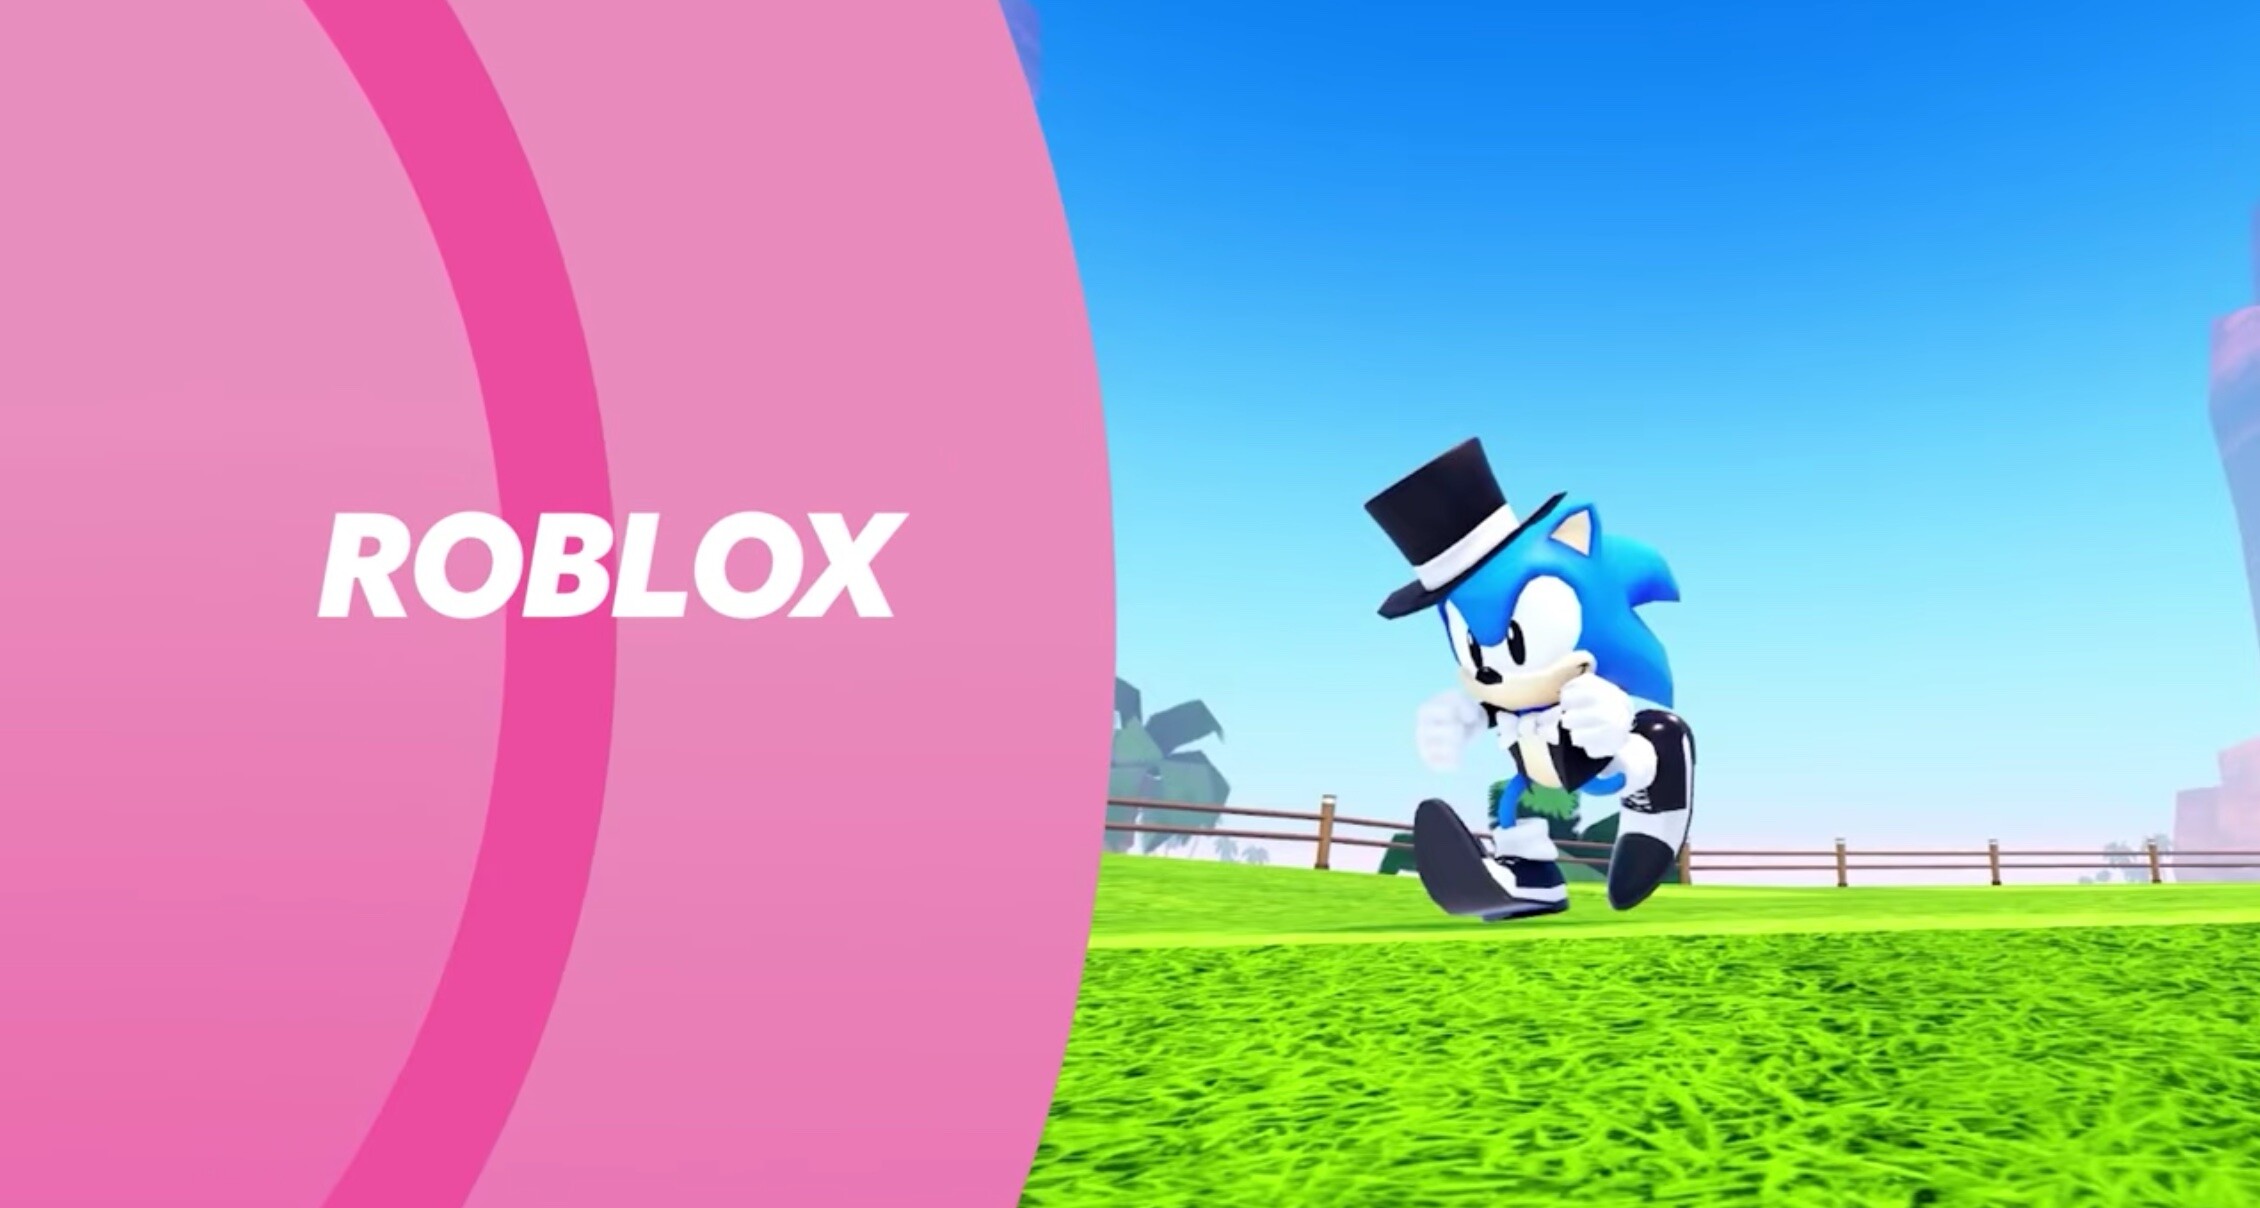 Parlo on X: This is a game on roblox, that exists